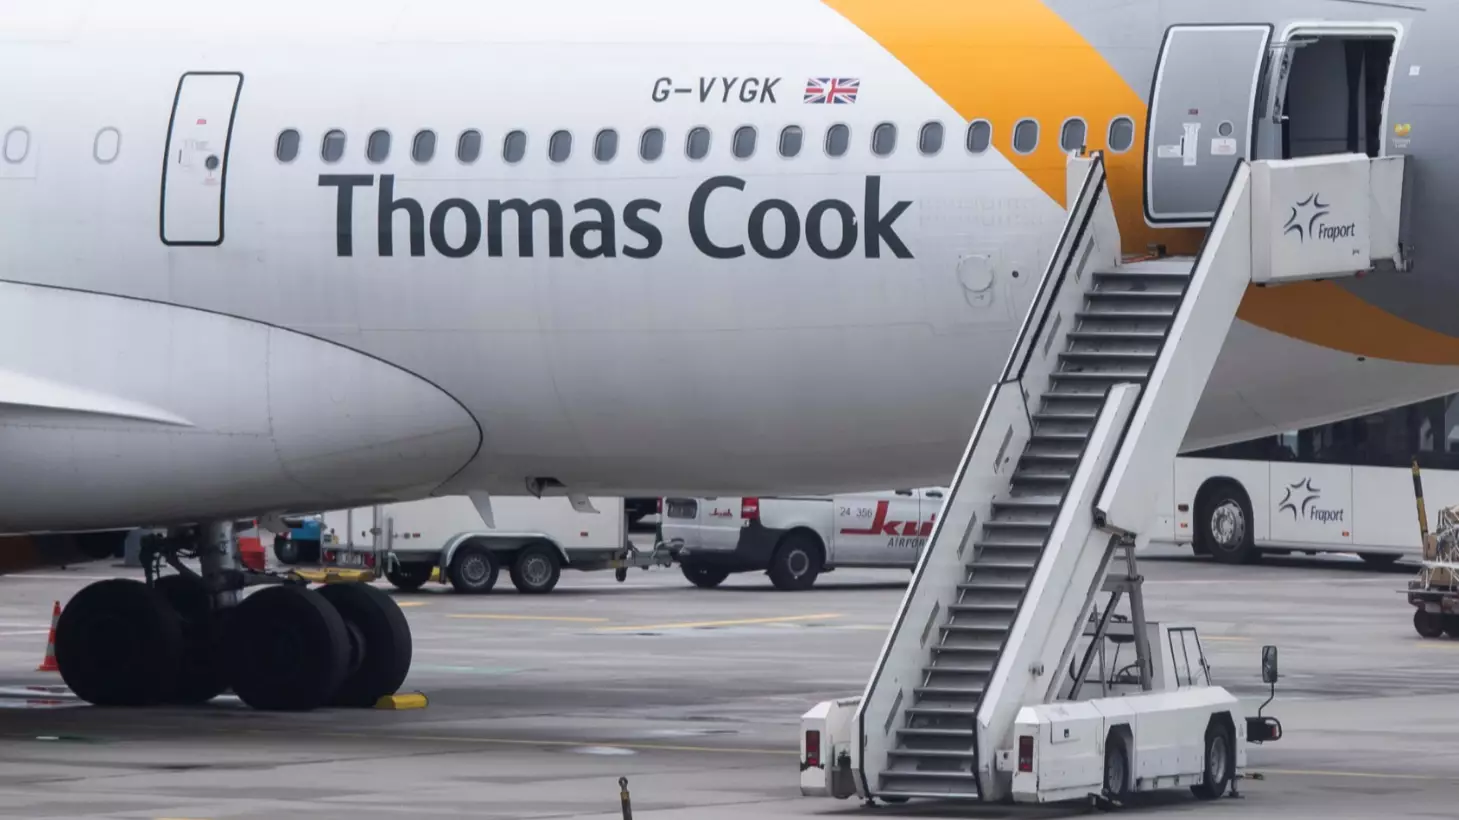 ​Virgin, EasyJet And TUI Offer Up Jobs To Former Thomas Cook Staff